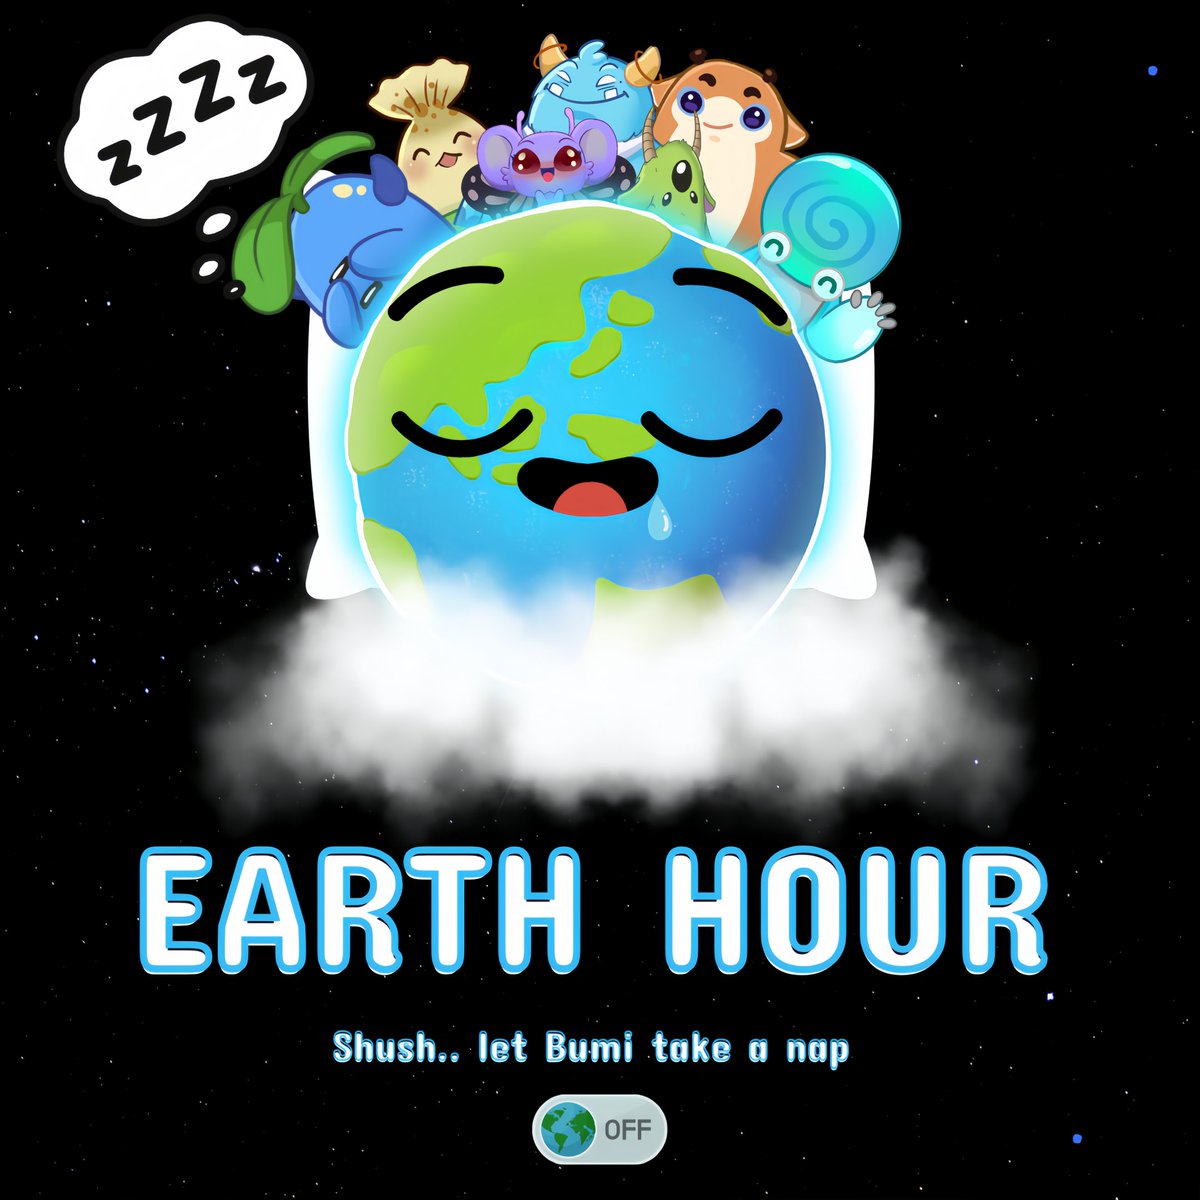 Let's protect what we adore! Switch off your lights and let our planet rest during the #EarthHour , from your local time at 20.30 to 21.30. With love, Bumis 💚🌍 #bumiuniverse #bumimovement #greengaming #buminextstopearth #playing4theplanet #environment #SaturdayMotivation